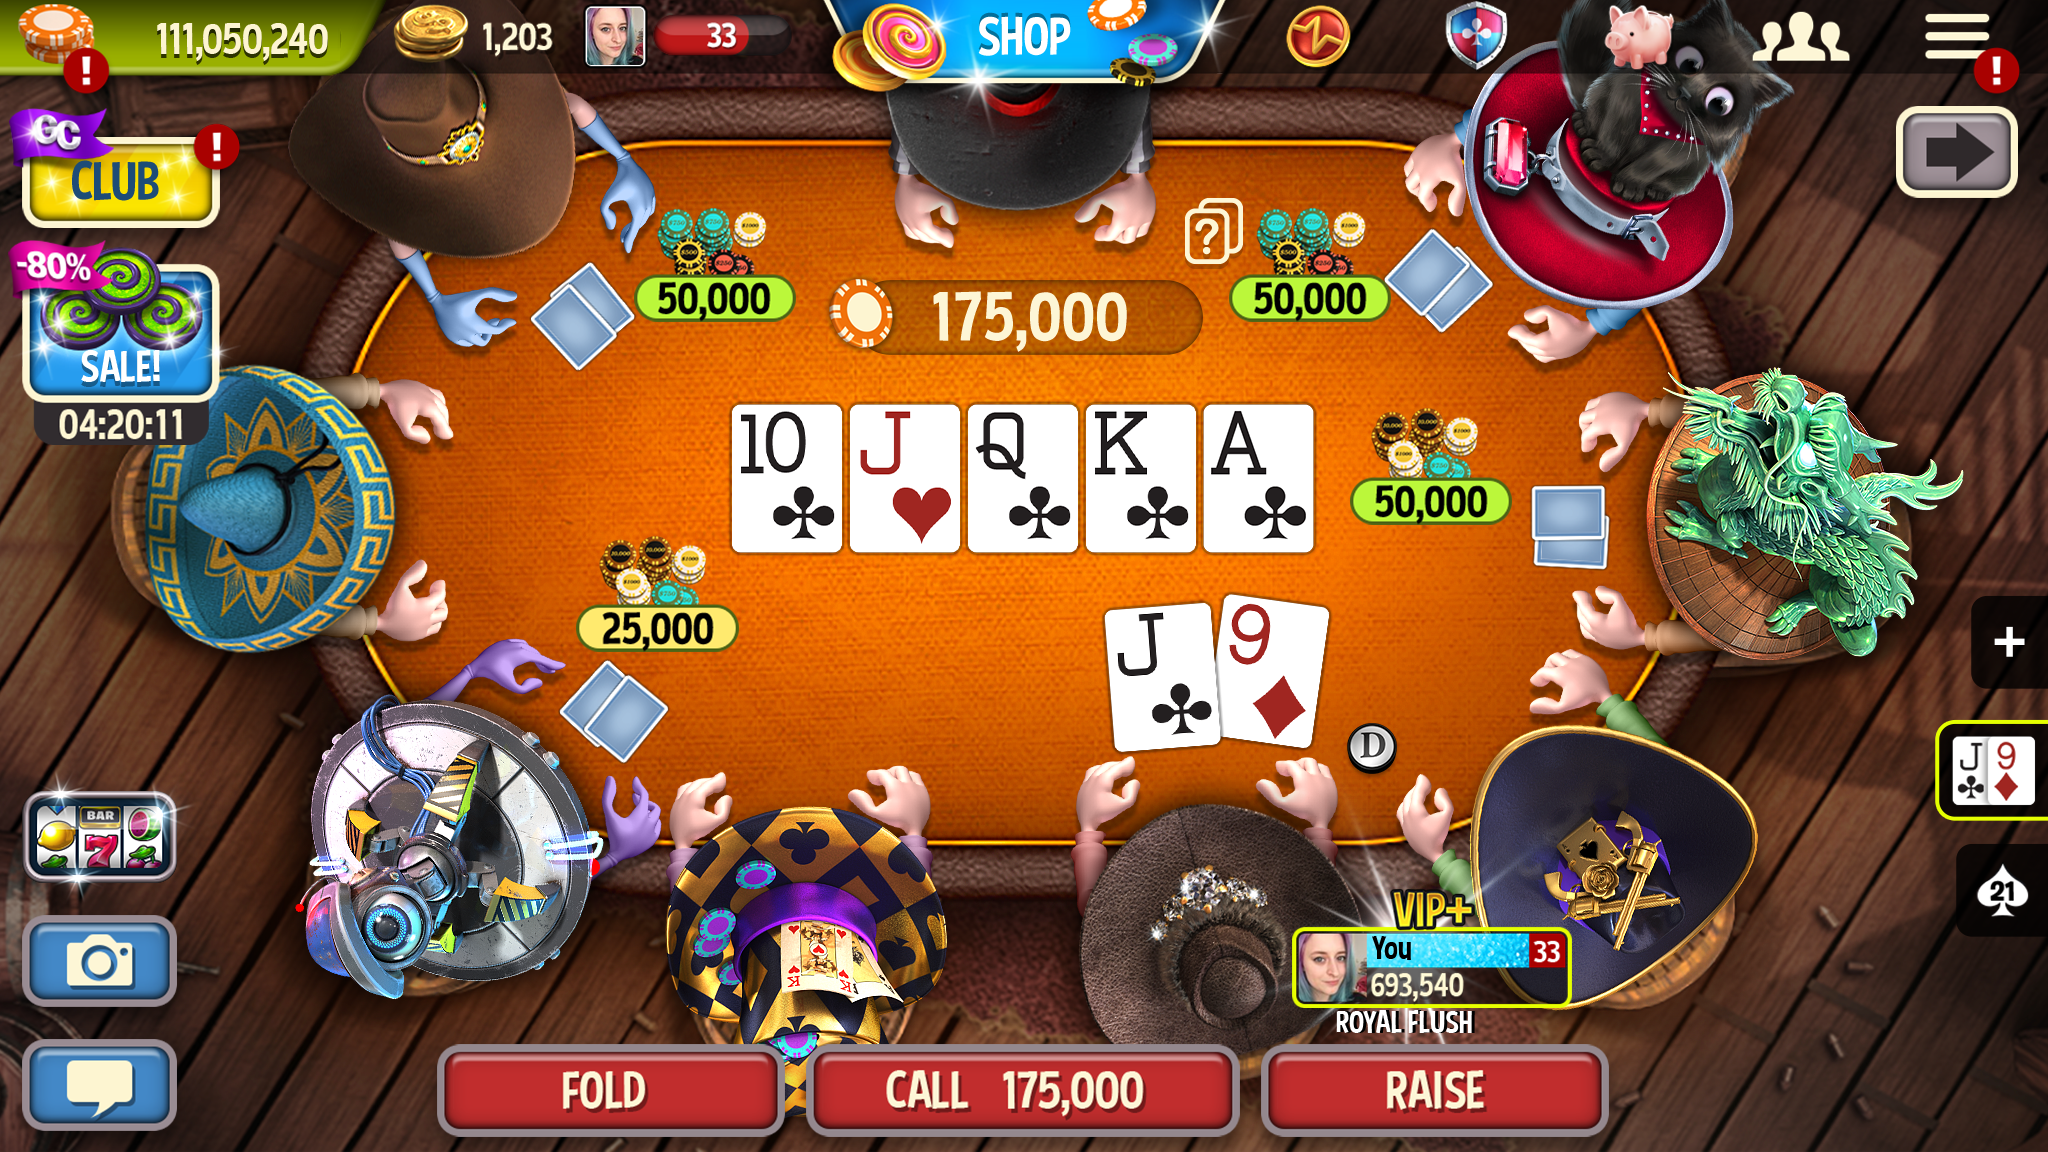 Android application Governor of Poker 3 - Texas screenshort